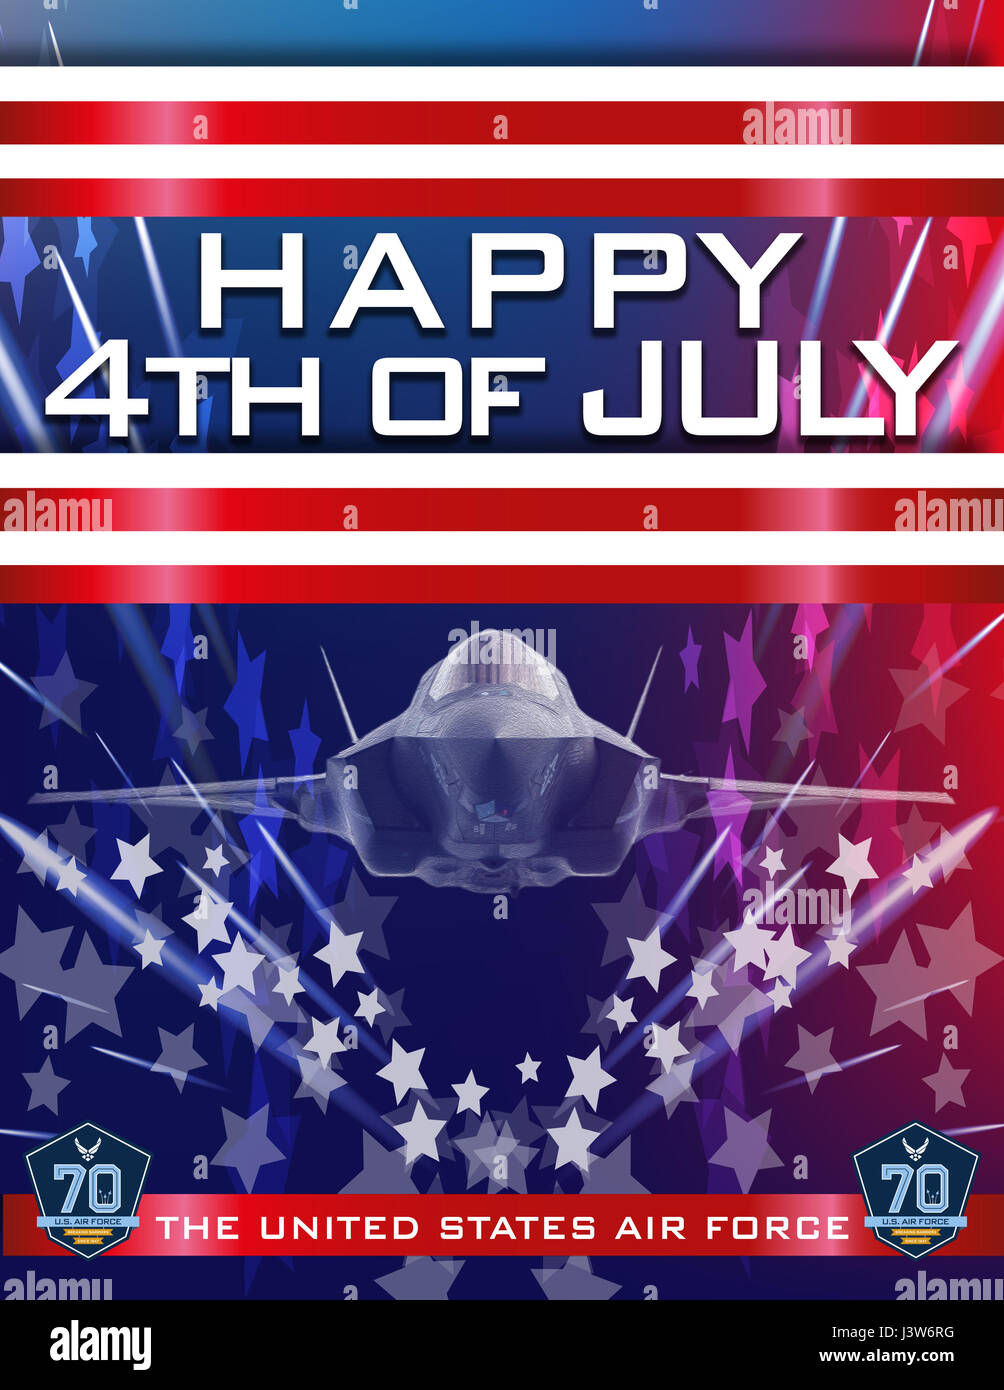 Patriotic Happy 4th of July celebration poster with AF 70th birthday marks Stock Photo